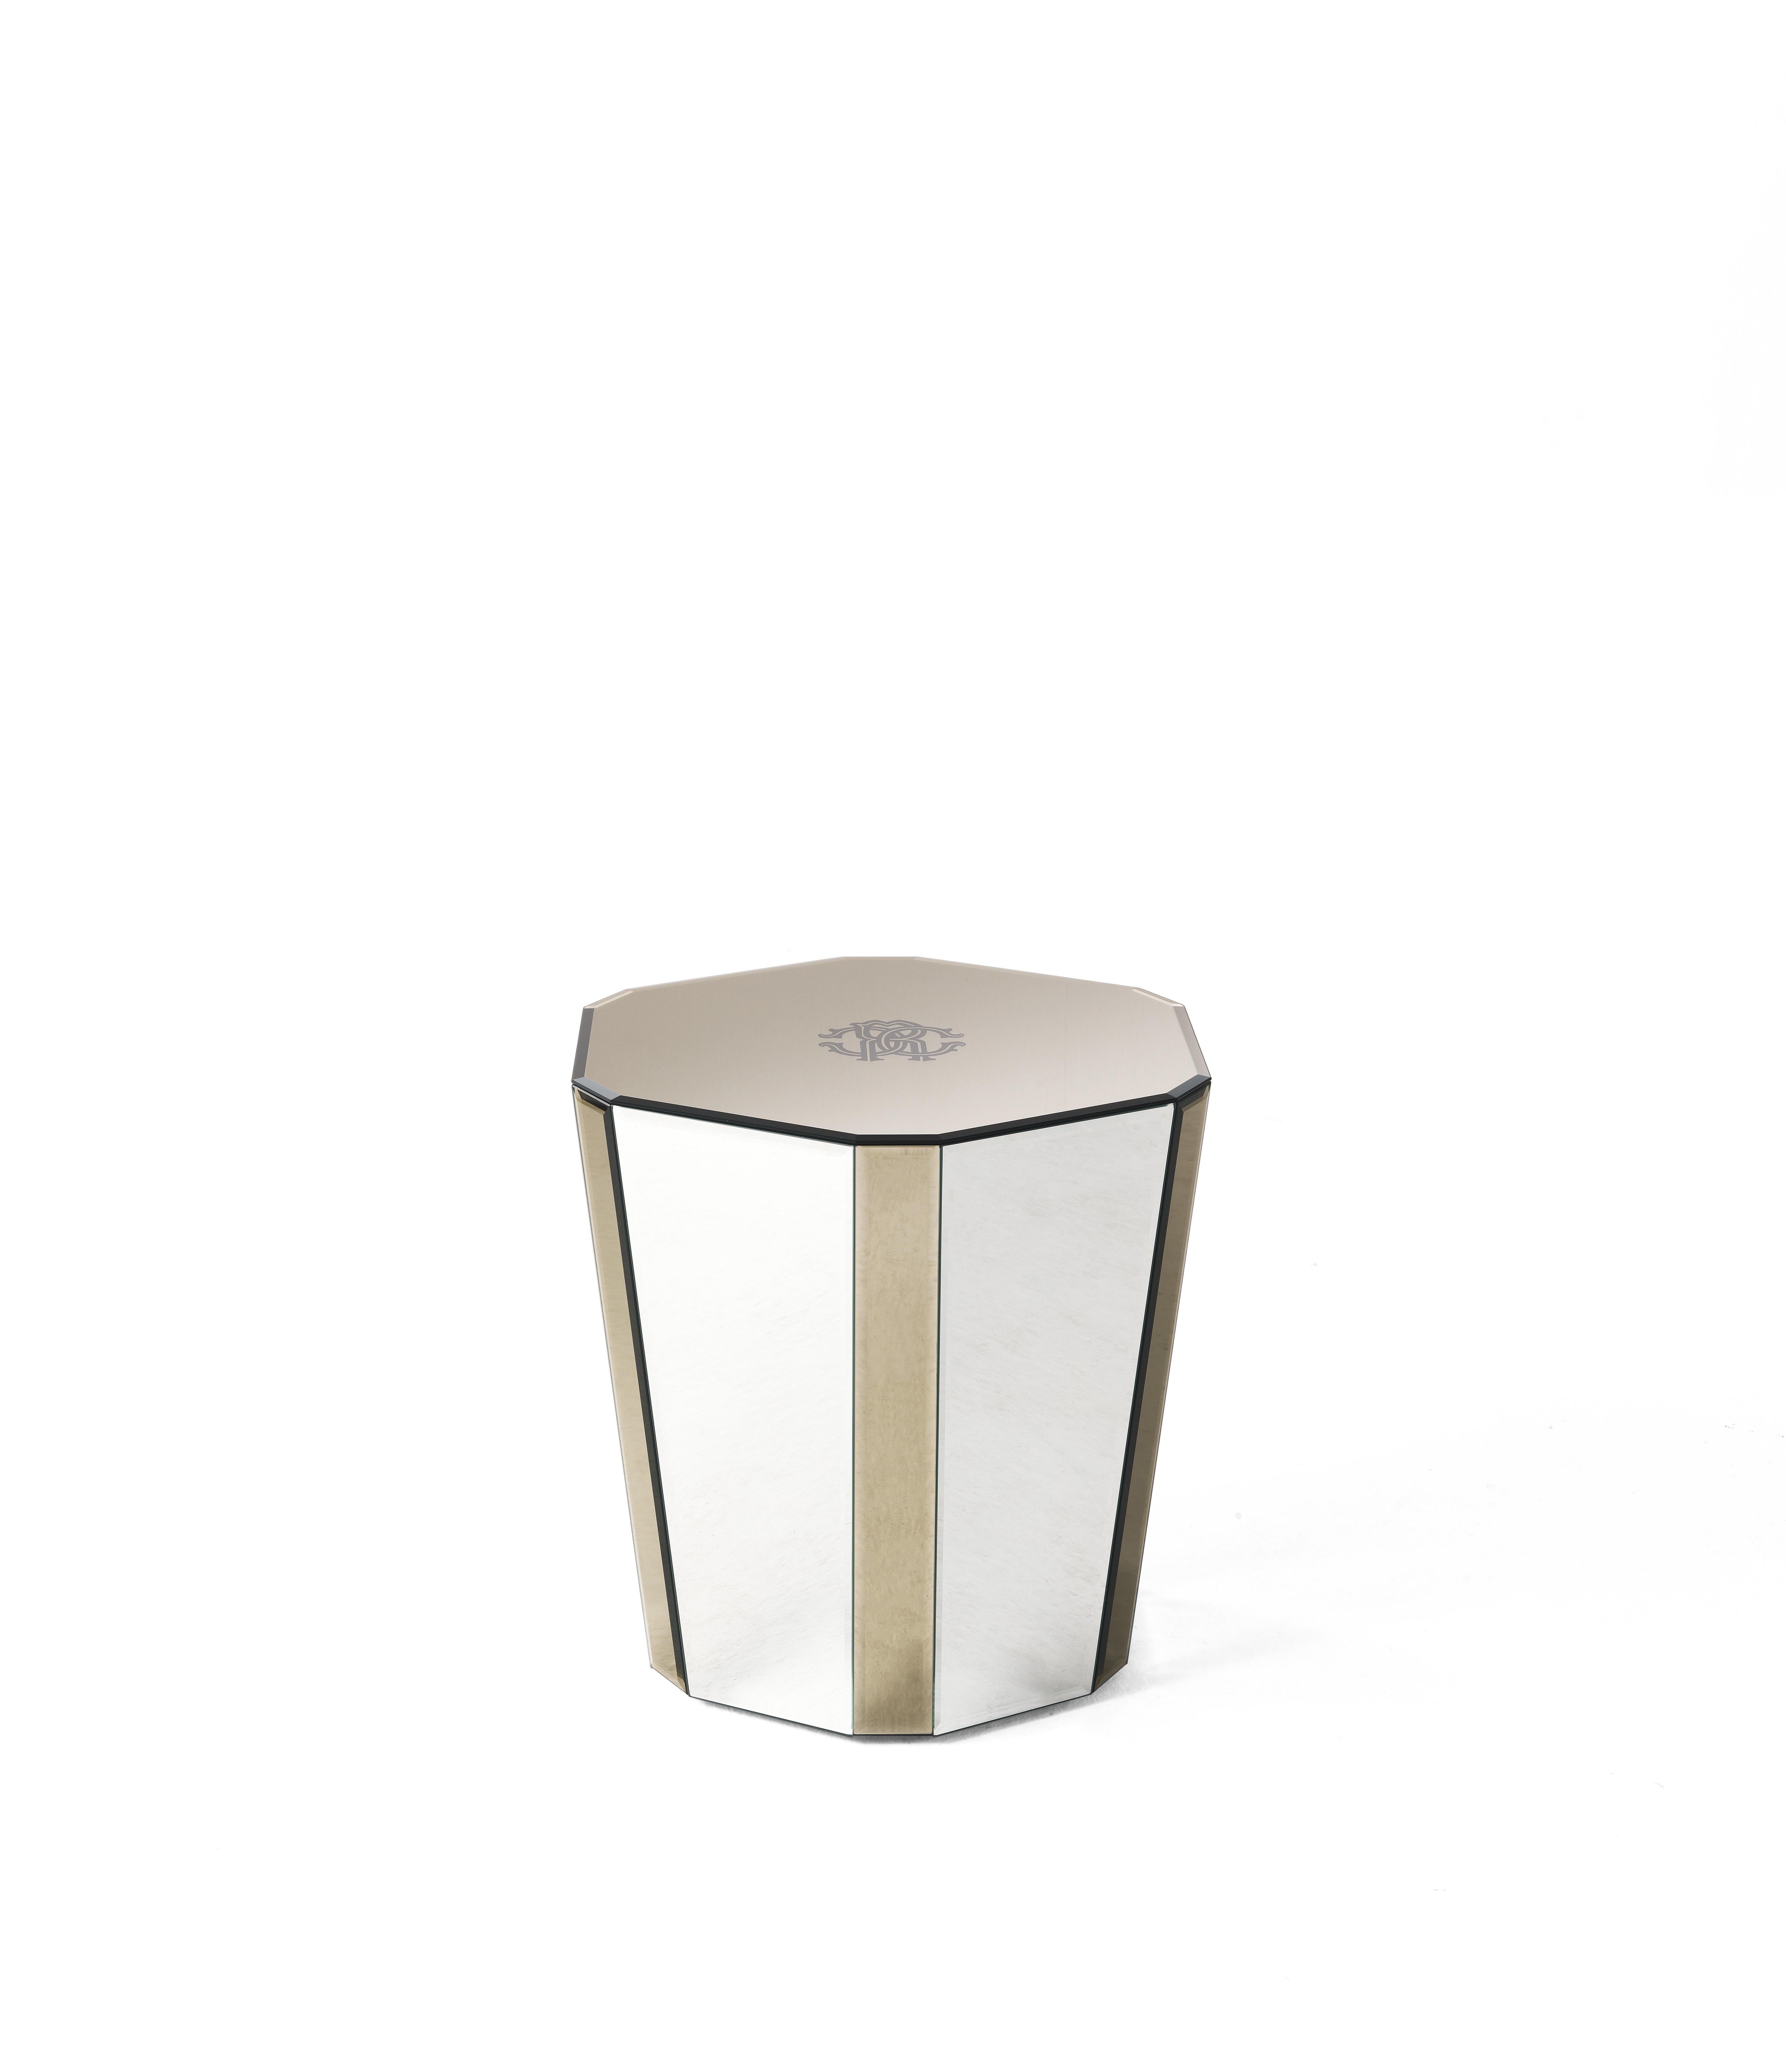 The geometric charm of the Hexagonal prism and the golden glares of the glass bronze mirror lends a refined contemporary glamor to this original and captivating side table.
Dorian Side Table Hexagonal side table with structure in multi-layer wood.